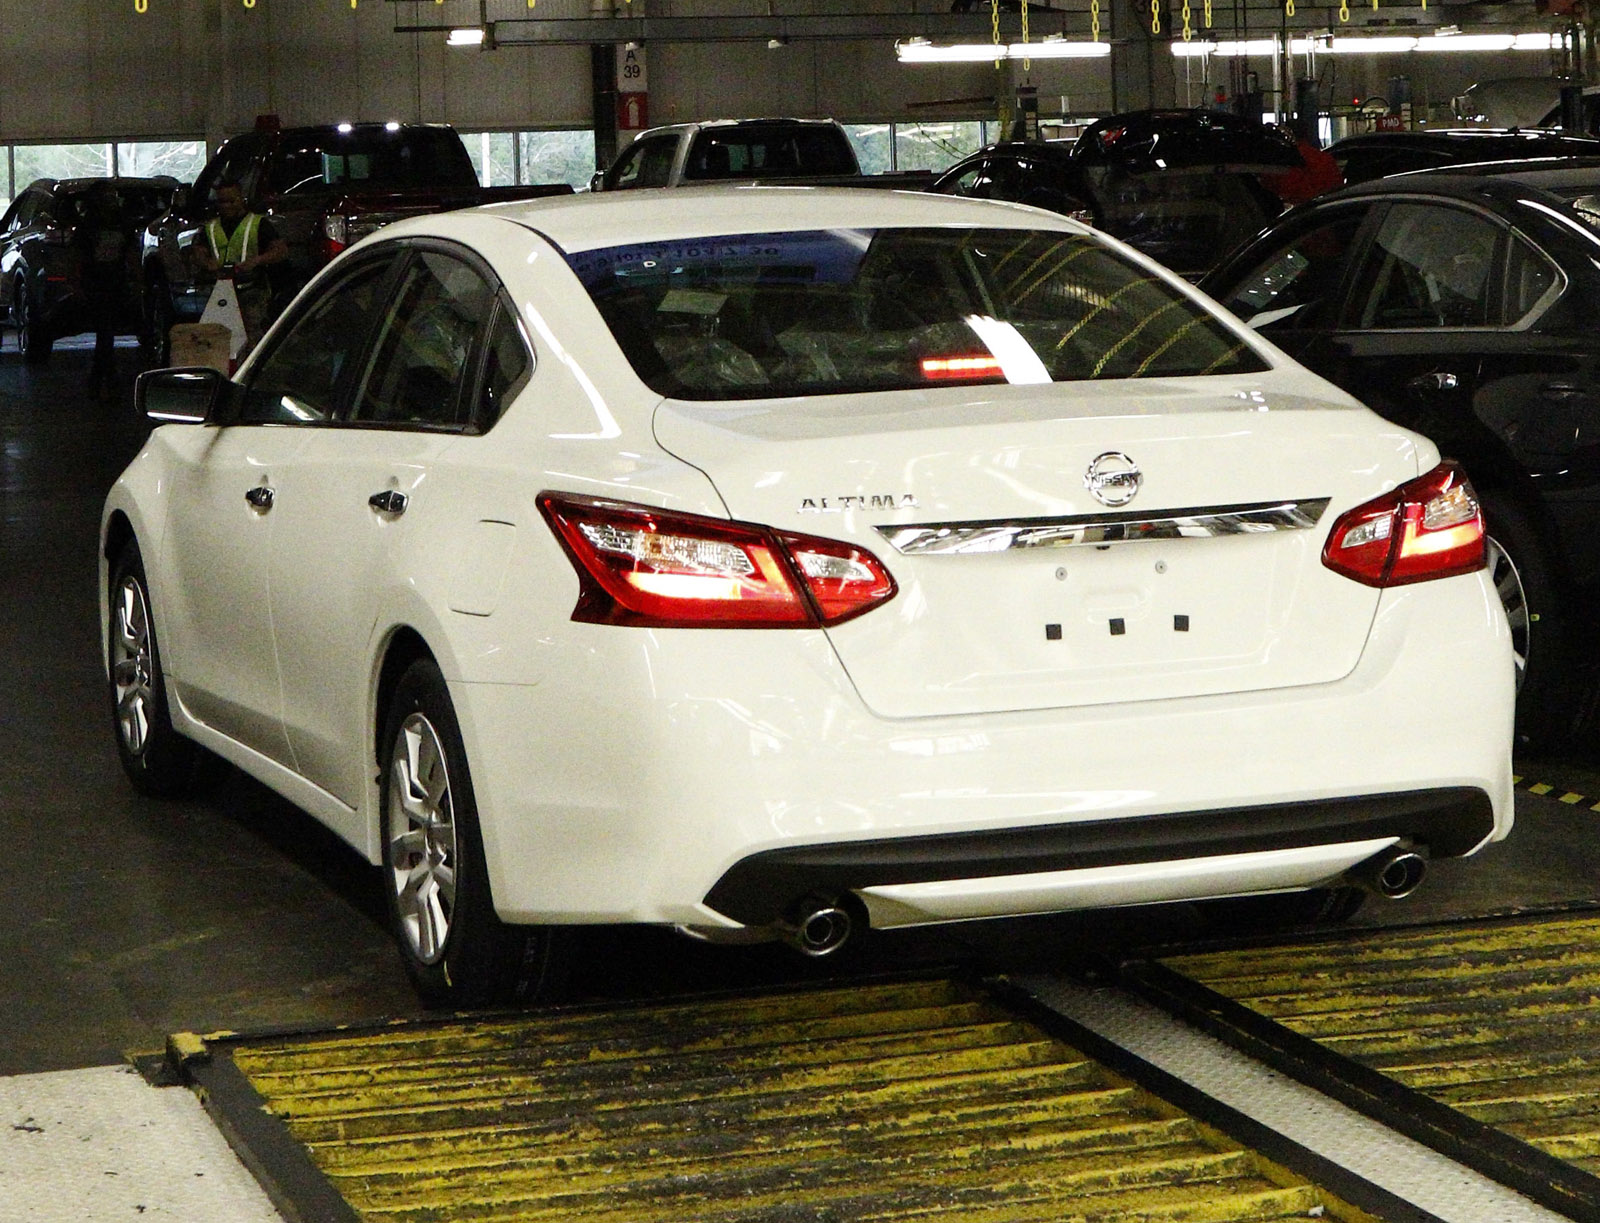 In this April 6, 2016, photograph, a newly-assembled Altima sedan rolls off the line and passes underneath a tally board at the Nissan Canton Vehicle Assembly Plant in Canton, Miss. Nissan product models assembled include the Altima, Armada, NV Cargo Van, NV Passenger Van, Murano, Titan King Cab and Crew Cab and the Frontier King Cab and Crew Cab. (AP Photo/Rogelio V. Solis)